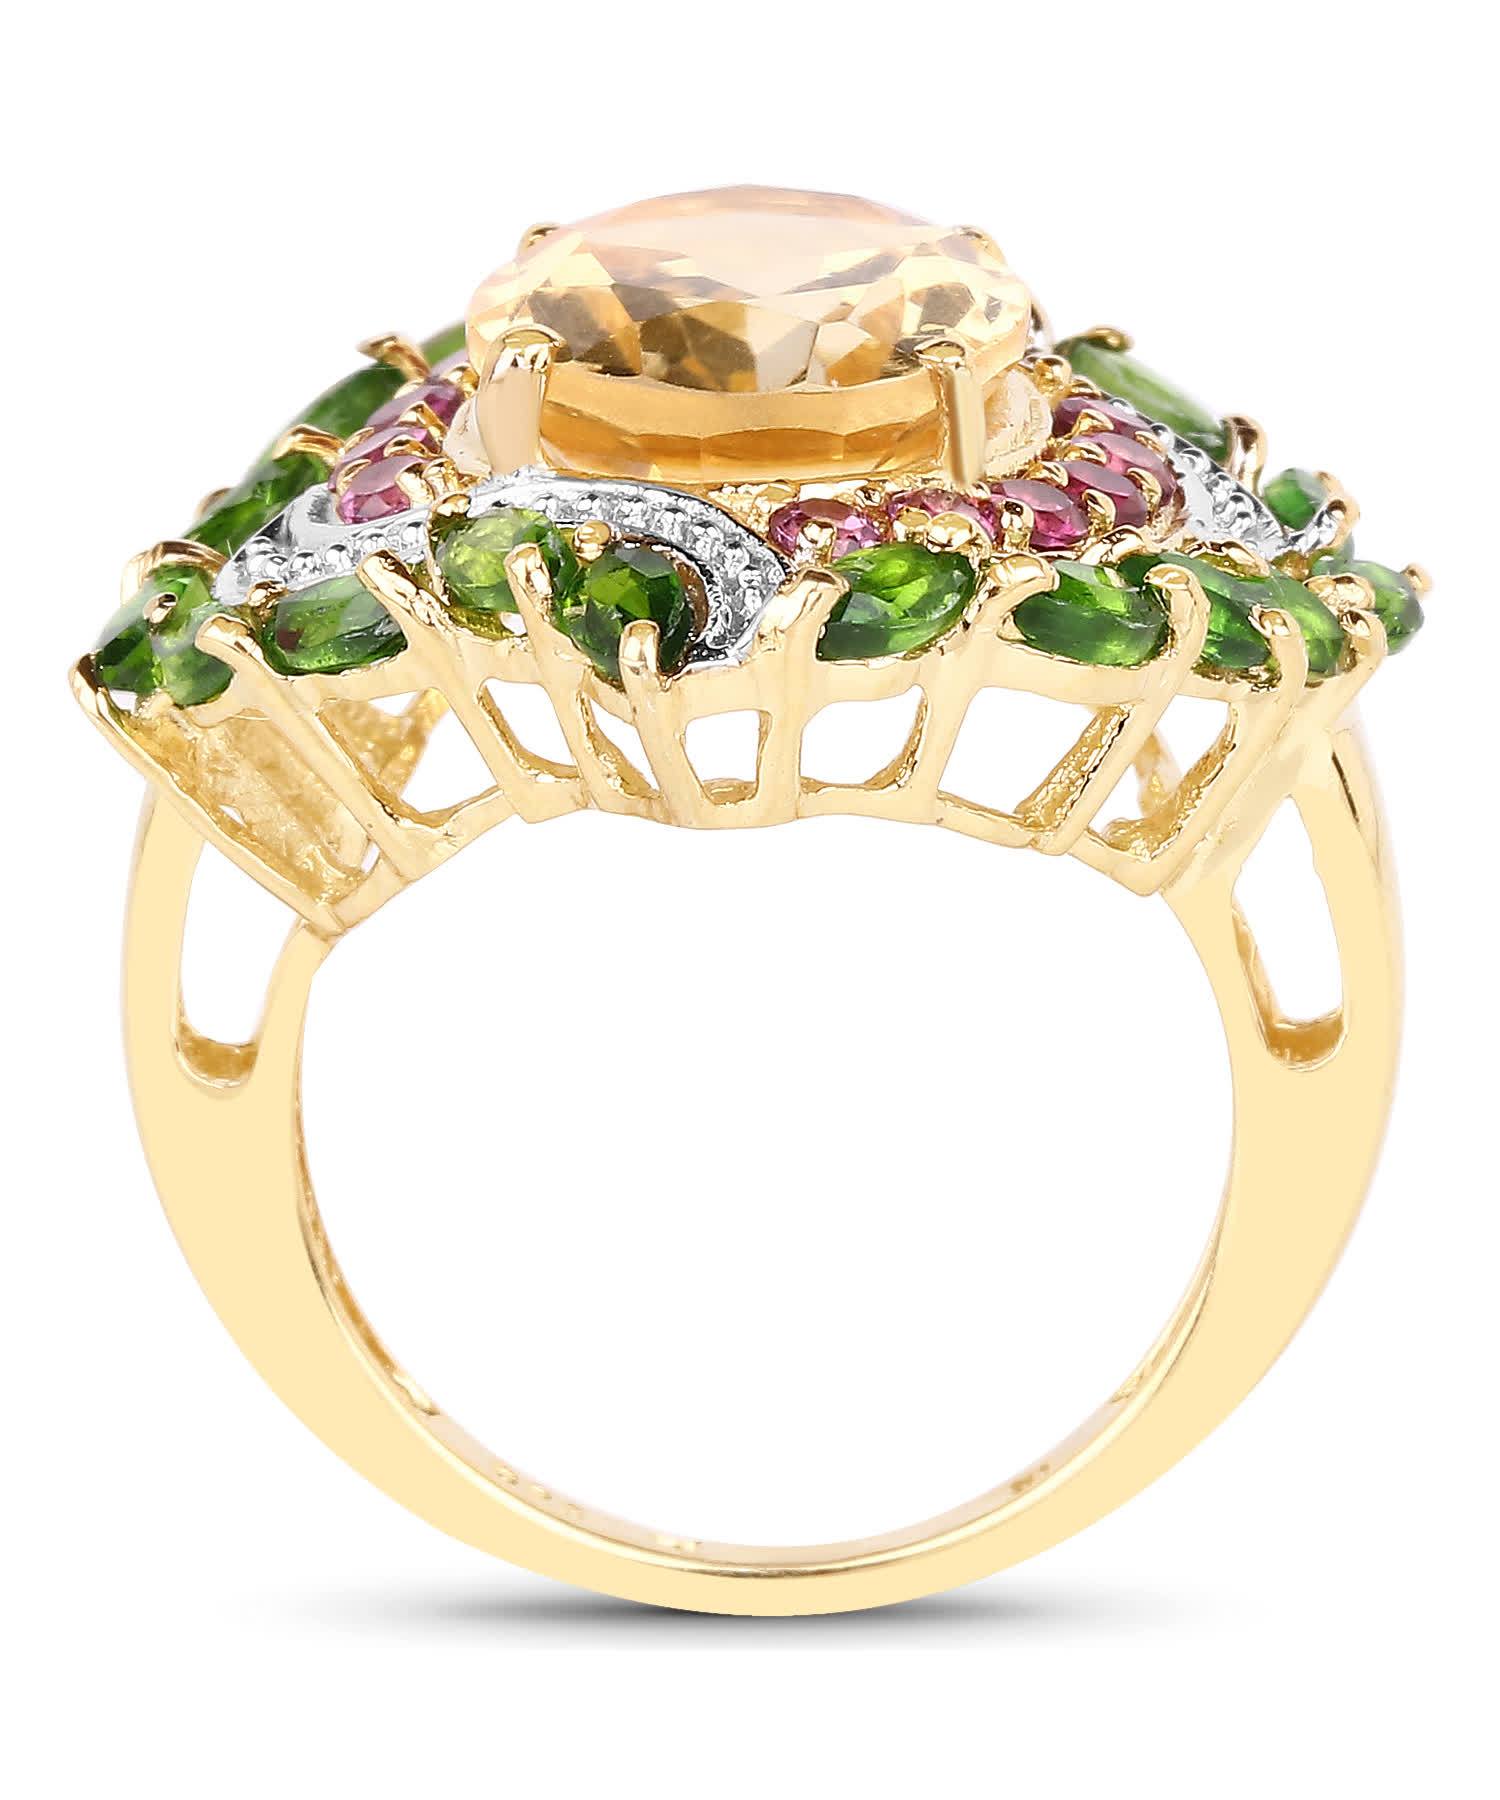 6.11ctw Natural Citrine, Rhodolite Garnet and Chrome Diopside 14k Gold Plated 925 Sterling Silver Cocktail Ring View 2